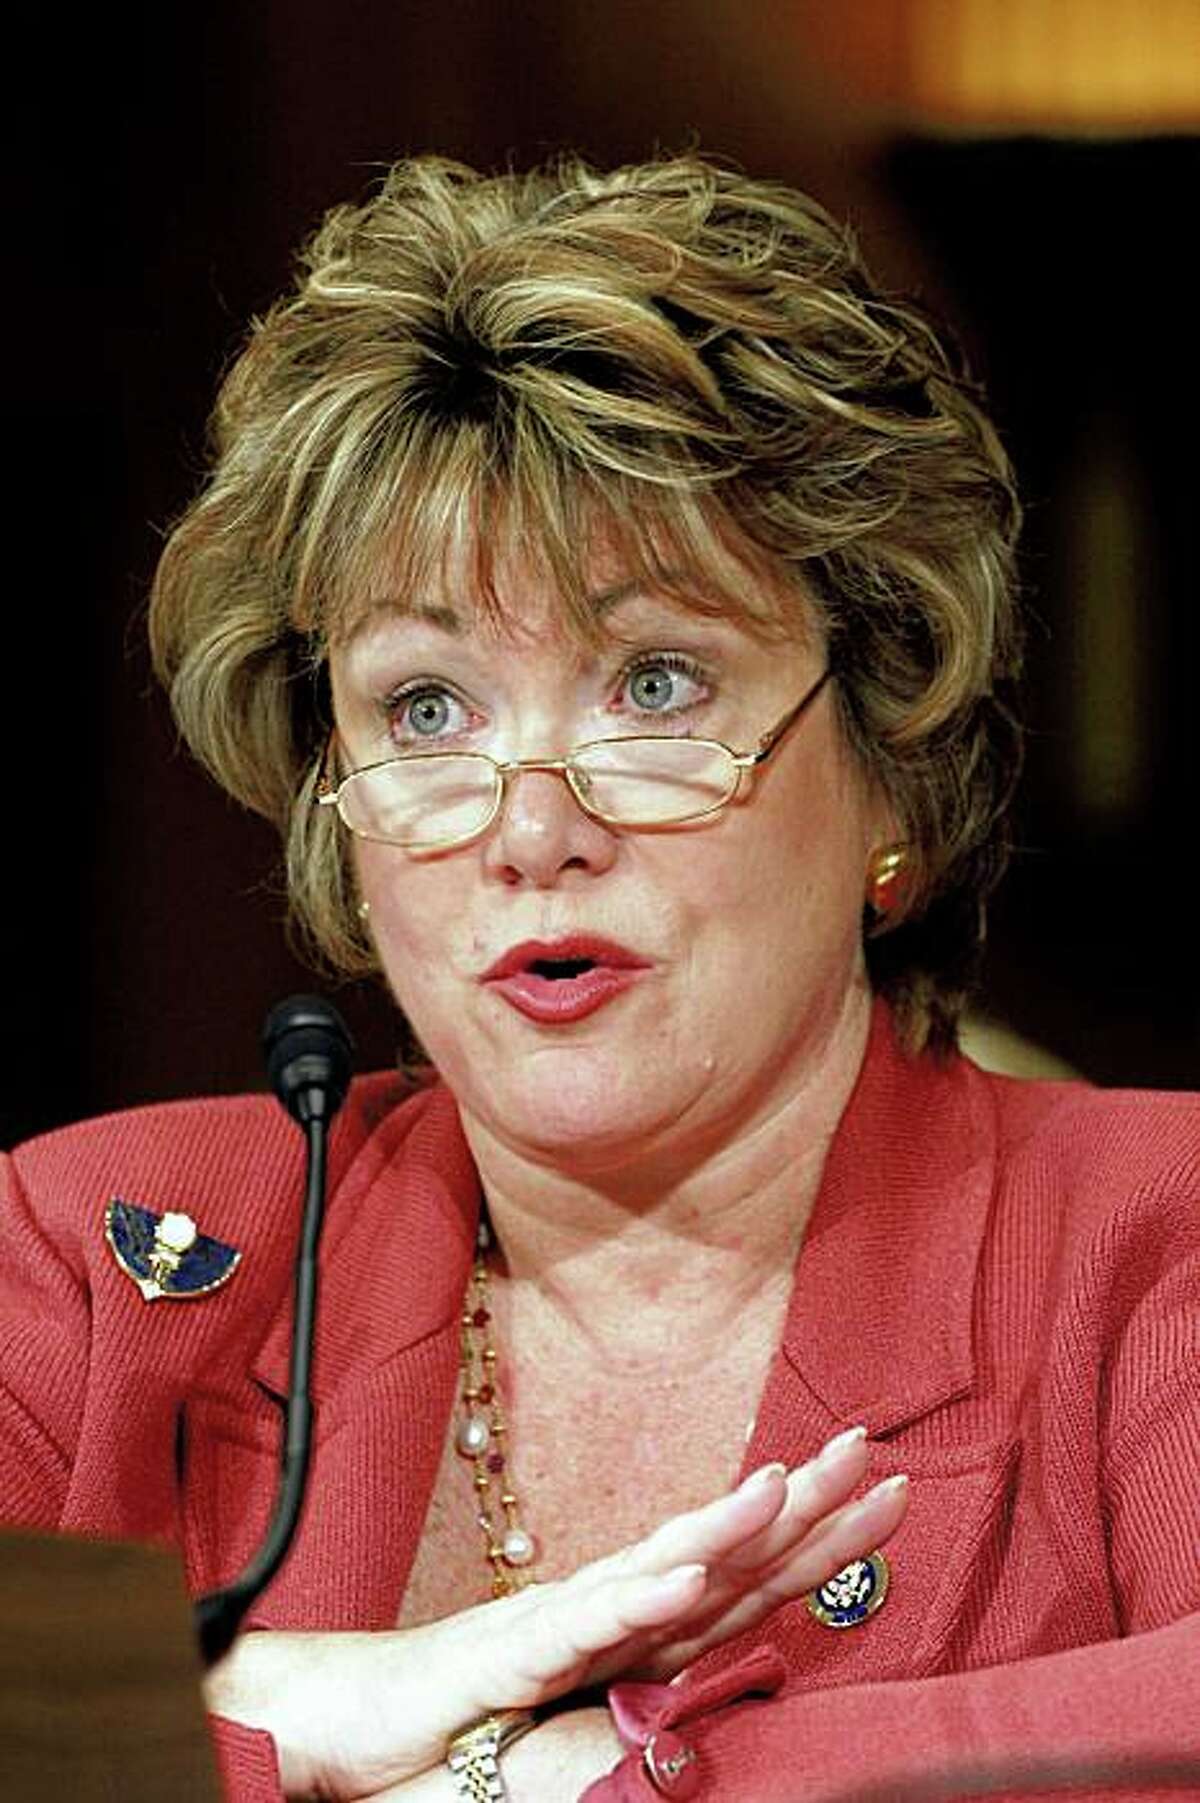 Rep. Ellen Tauscher, D- Calif. testifies on Capitol Hill in Washington, Tuesday, June 9, 2009, before the Senate Foreign Relations Committee hearing on her nomination to become Undersecretary of State for Arms Control and International Security. (AP Photo/Harry Hamburg)